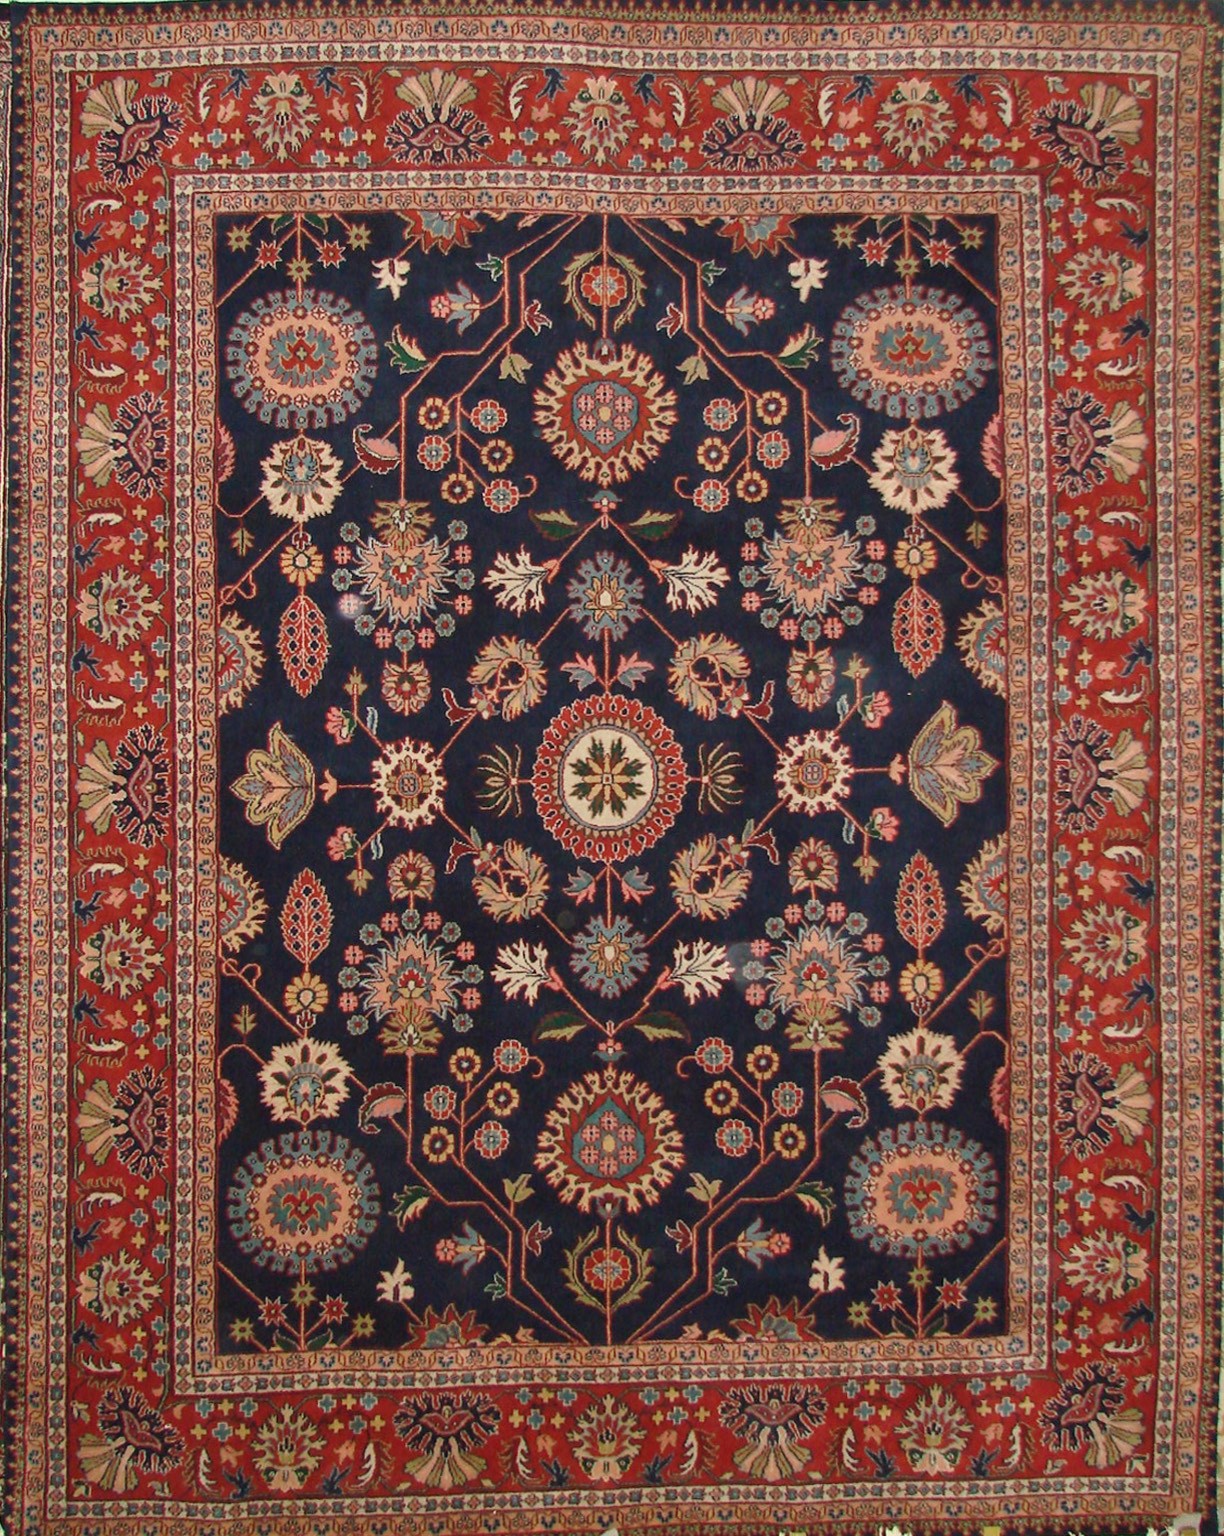 Clearance & Discount Rugs KASHAN-902 0098 Medium Blue - Navy & Rust - Orange Hand Knotted Rug